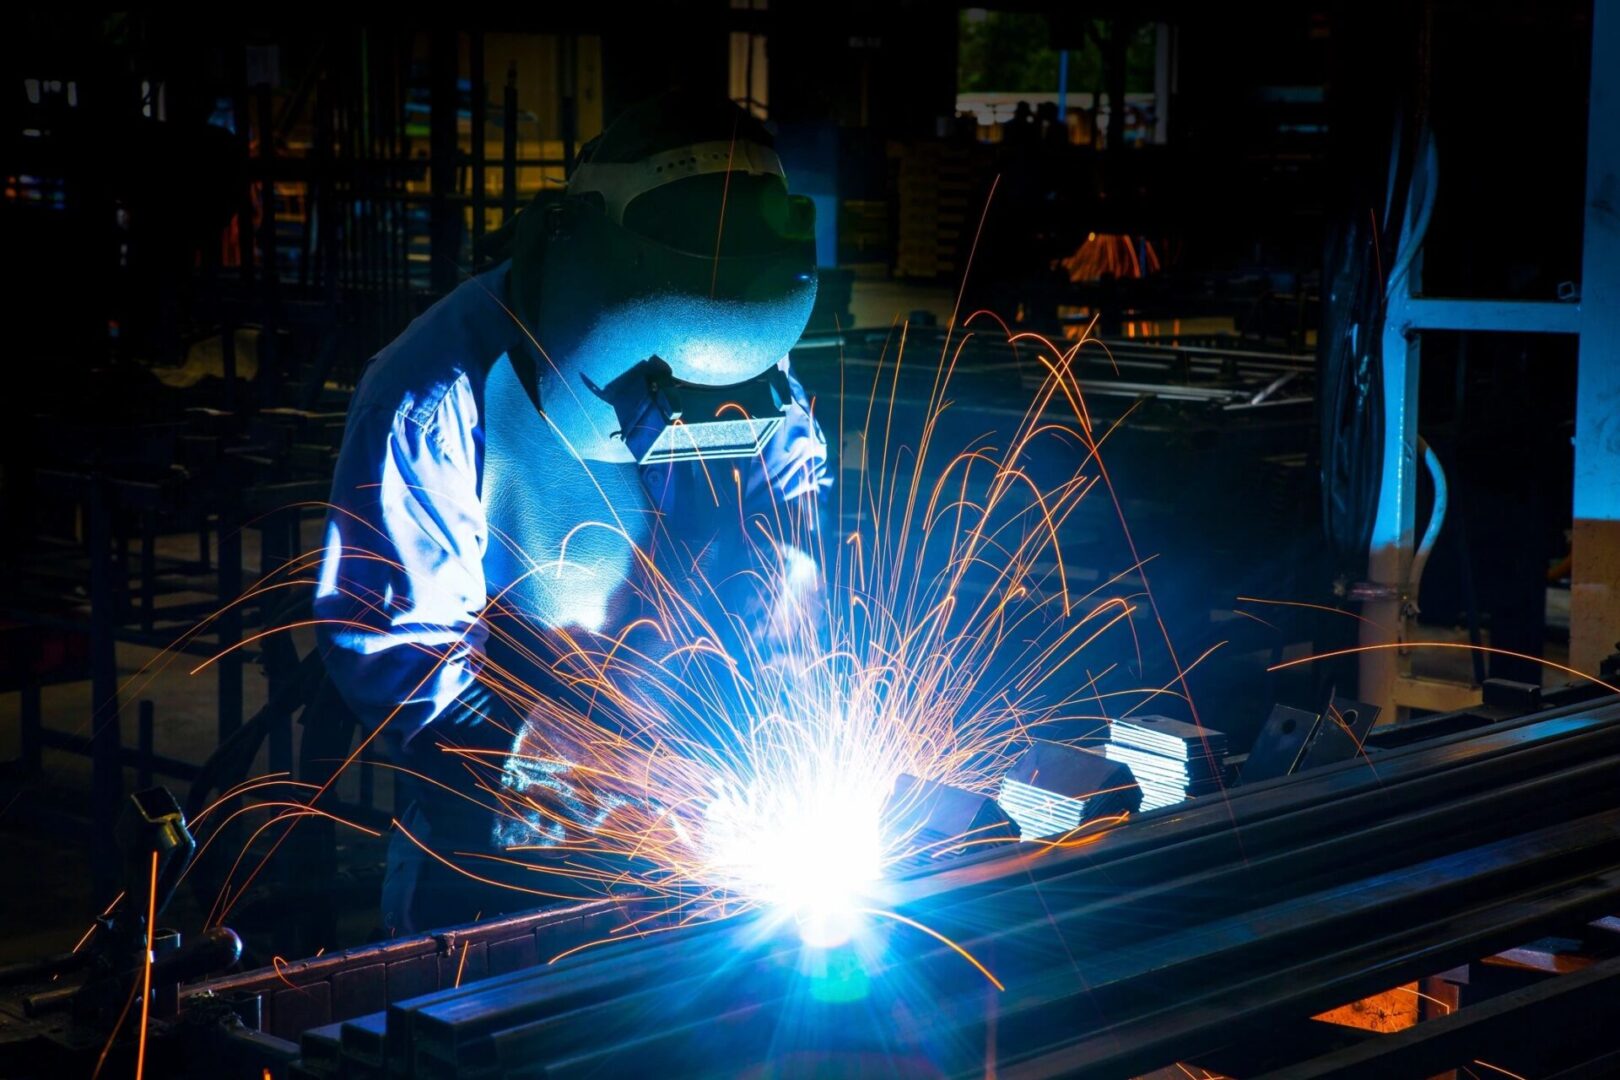 A person welding metal in an industrial setting.